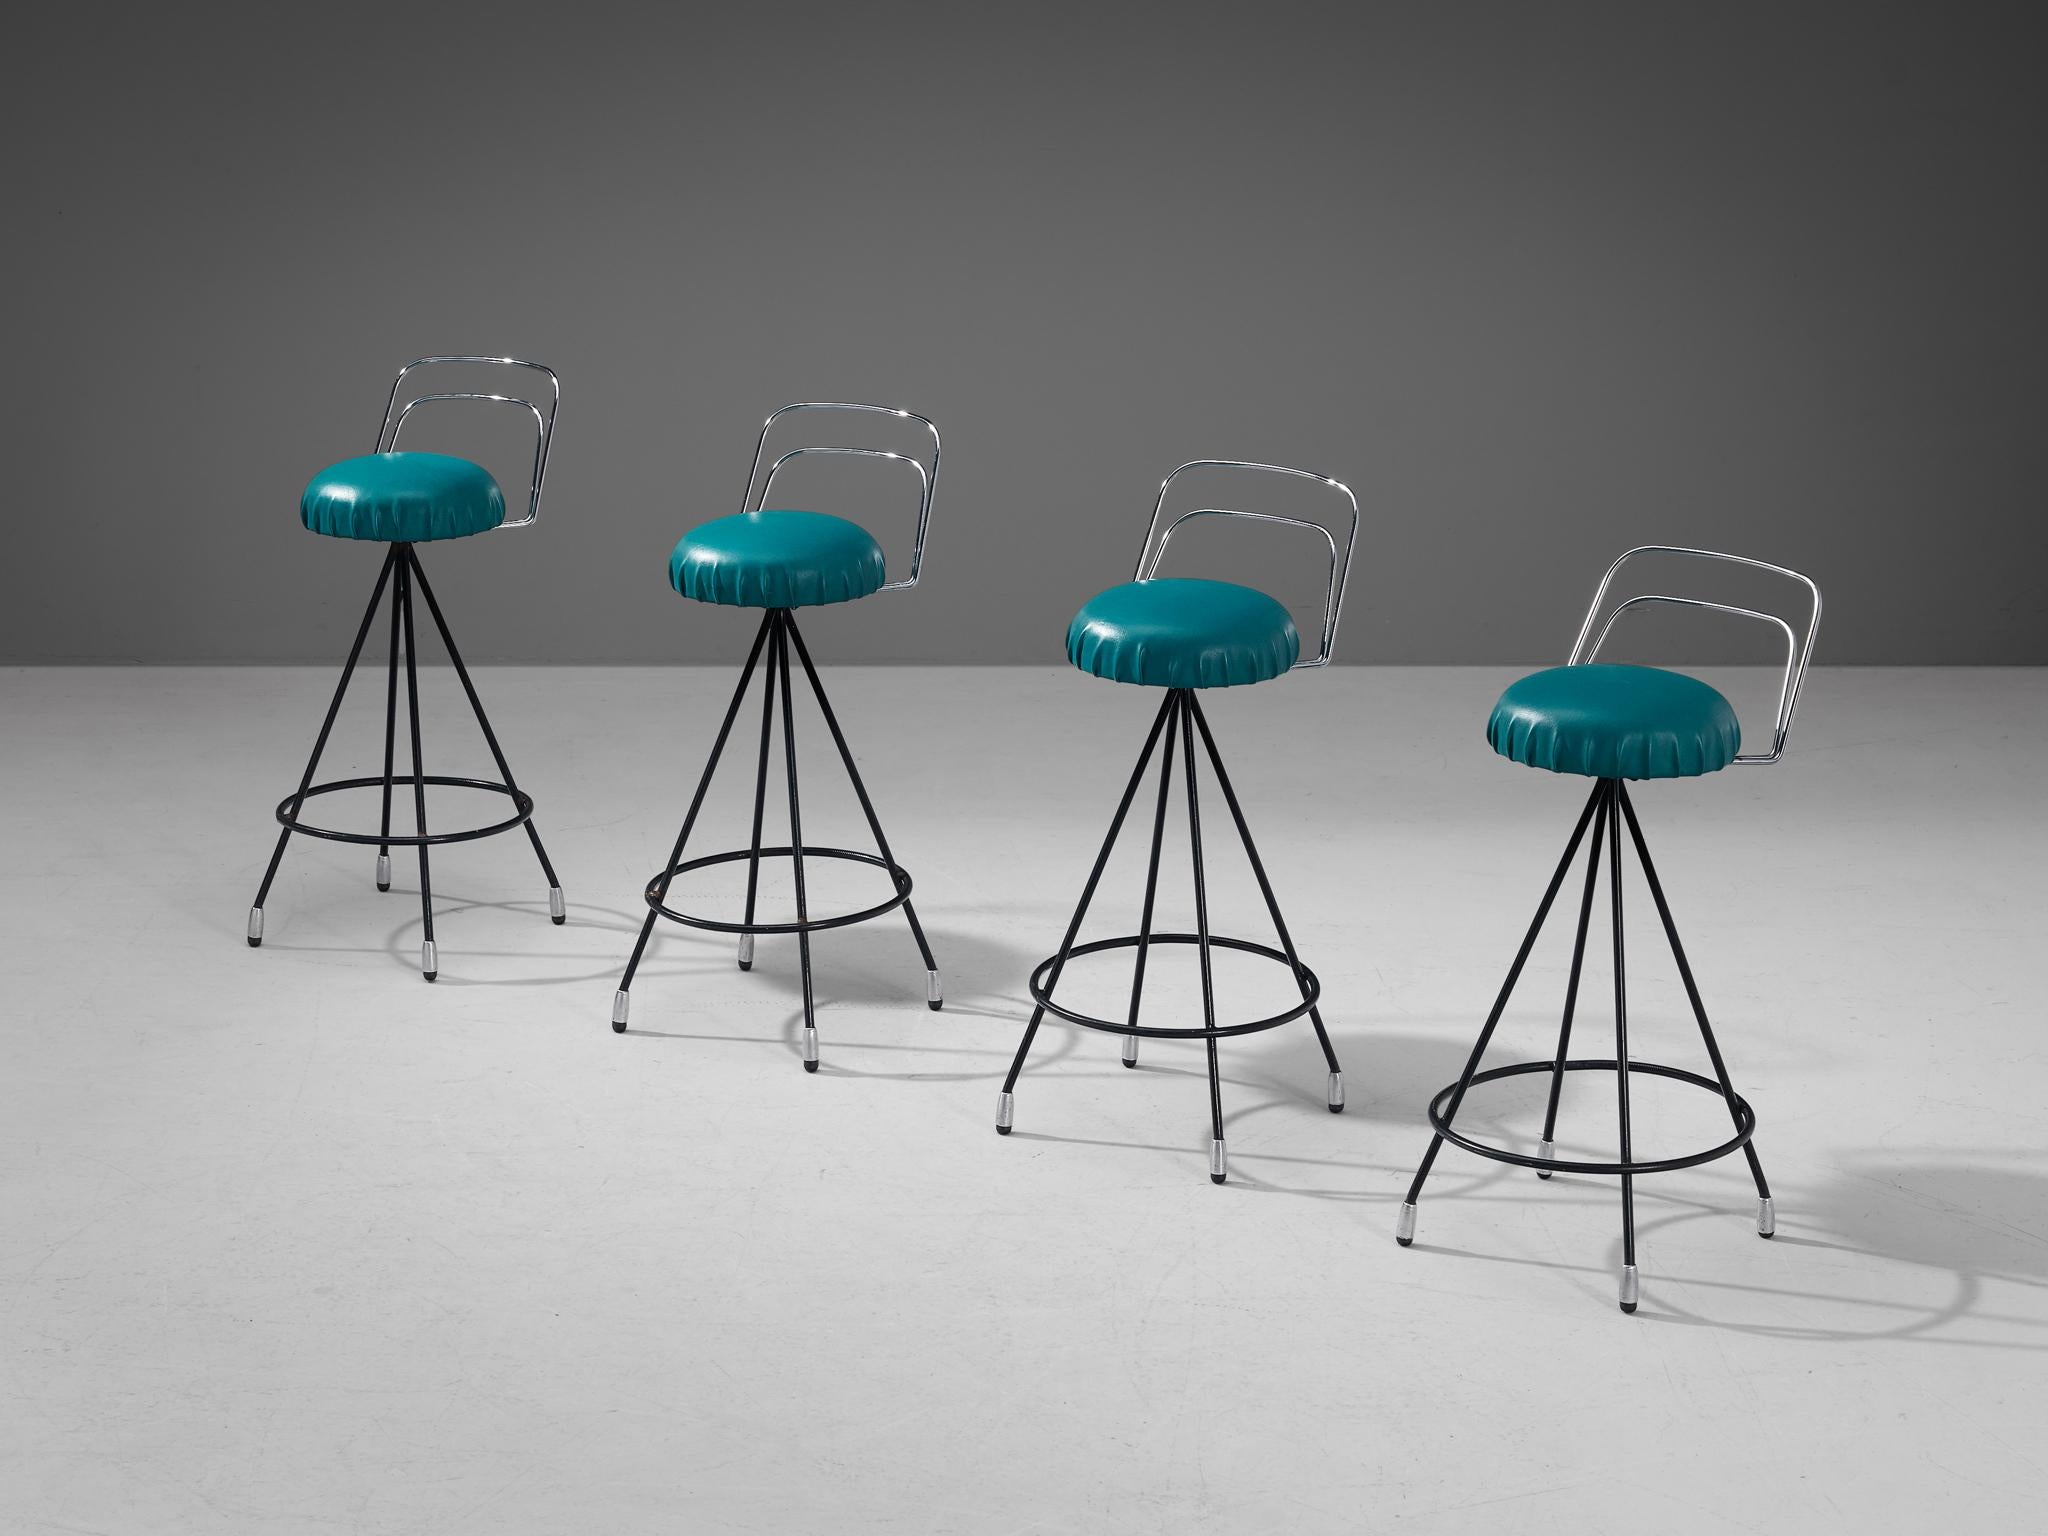 Set of four barstools, chrome-plated metal, metal, leatherette, Europe, 1960s. 

Set of four eccentric barstools executed in black lacquered metal with green faux leather seatings. Its design shows clean and geometrical features characteristic for